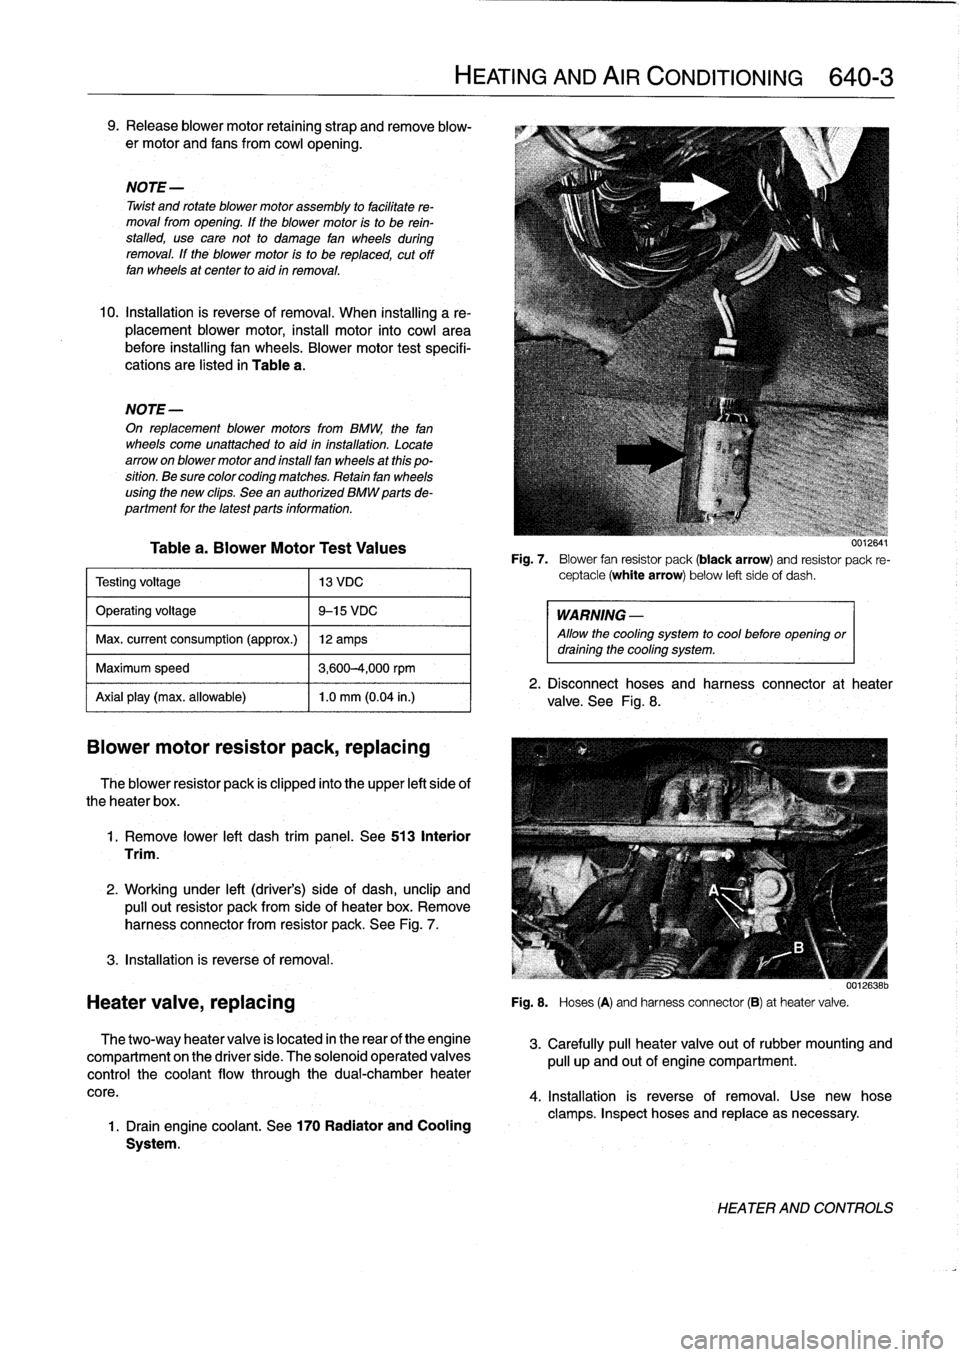 BMW 318i 1998 E36 Service Manual 
9
.
Release
blower
motor
retaining
strap
andremove
blow-
er
motor
and
fans
fromcowl
opening
.

NOTE-

Twist
and
rotate
blowermotor
assembly
to
facilítate
re-
moval
from
opening
.
If
the
blower
motor